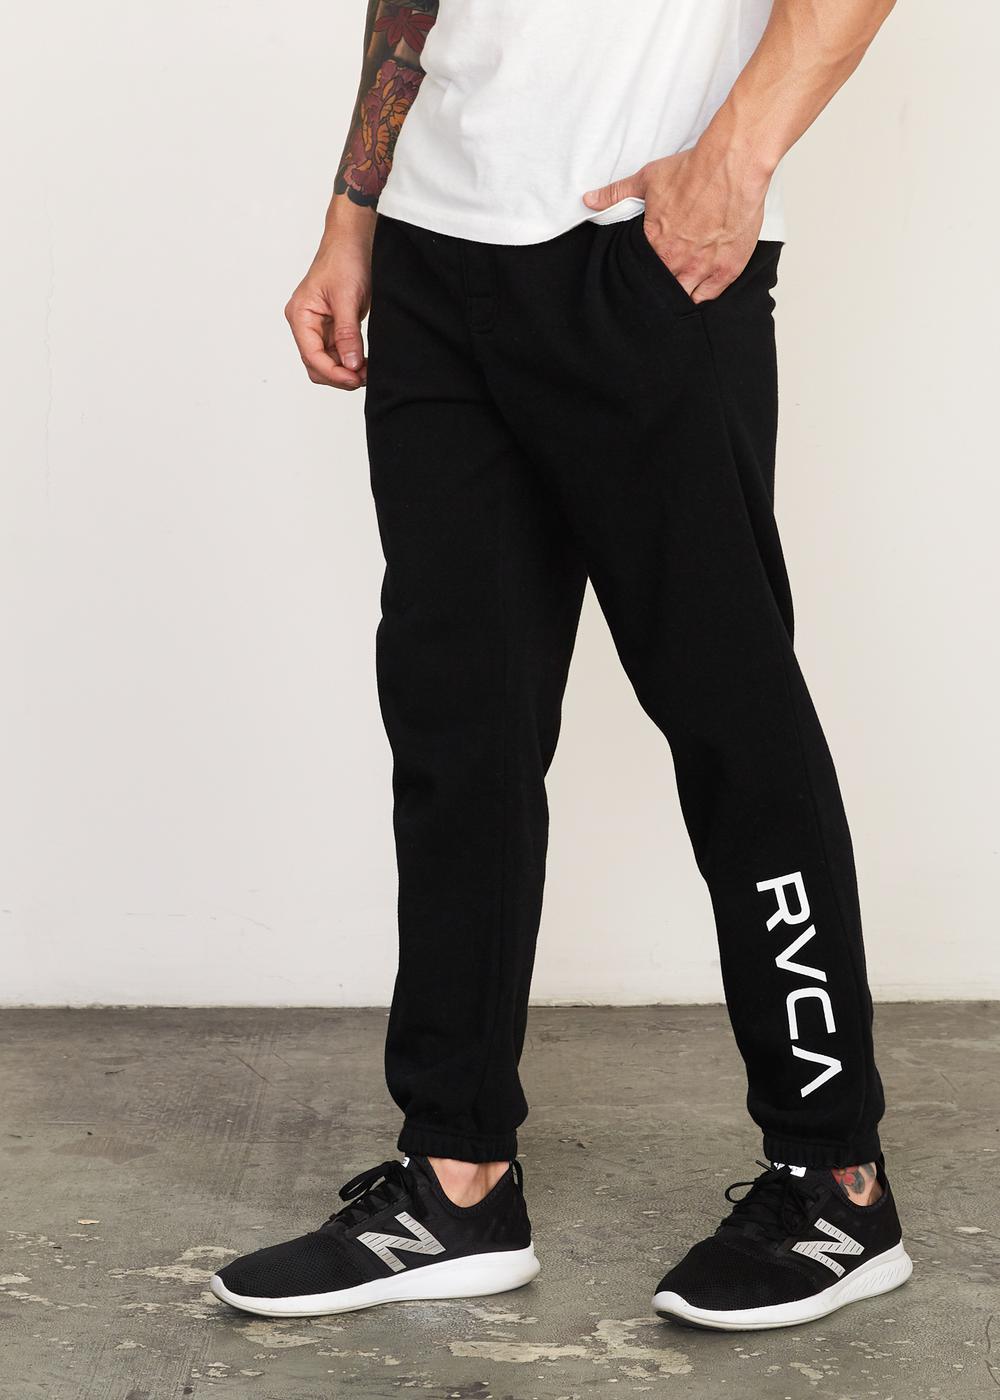 RVCA - Similar stores, new products, store review, Q&A | Modvisor